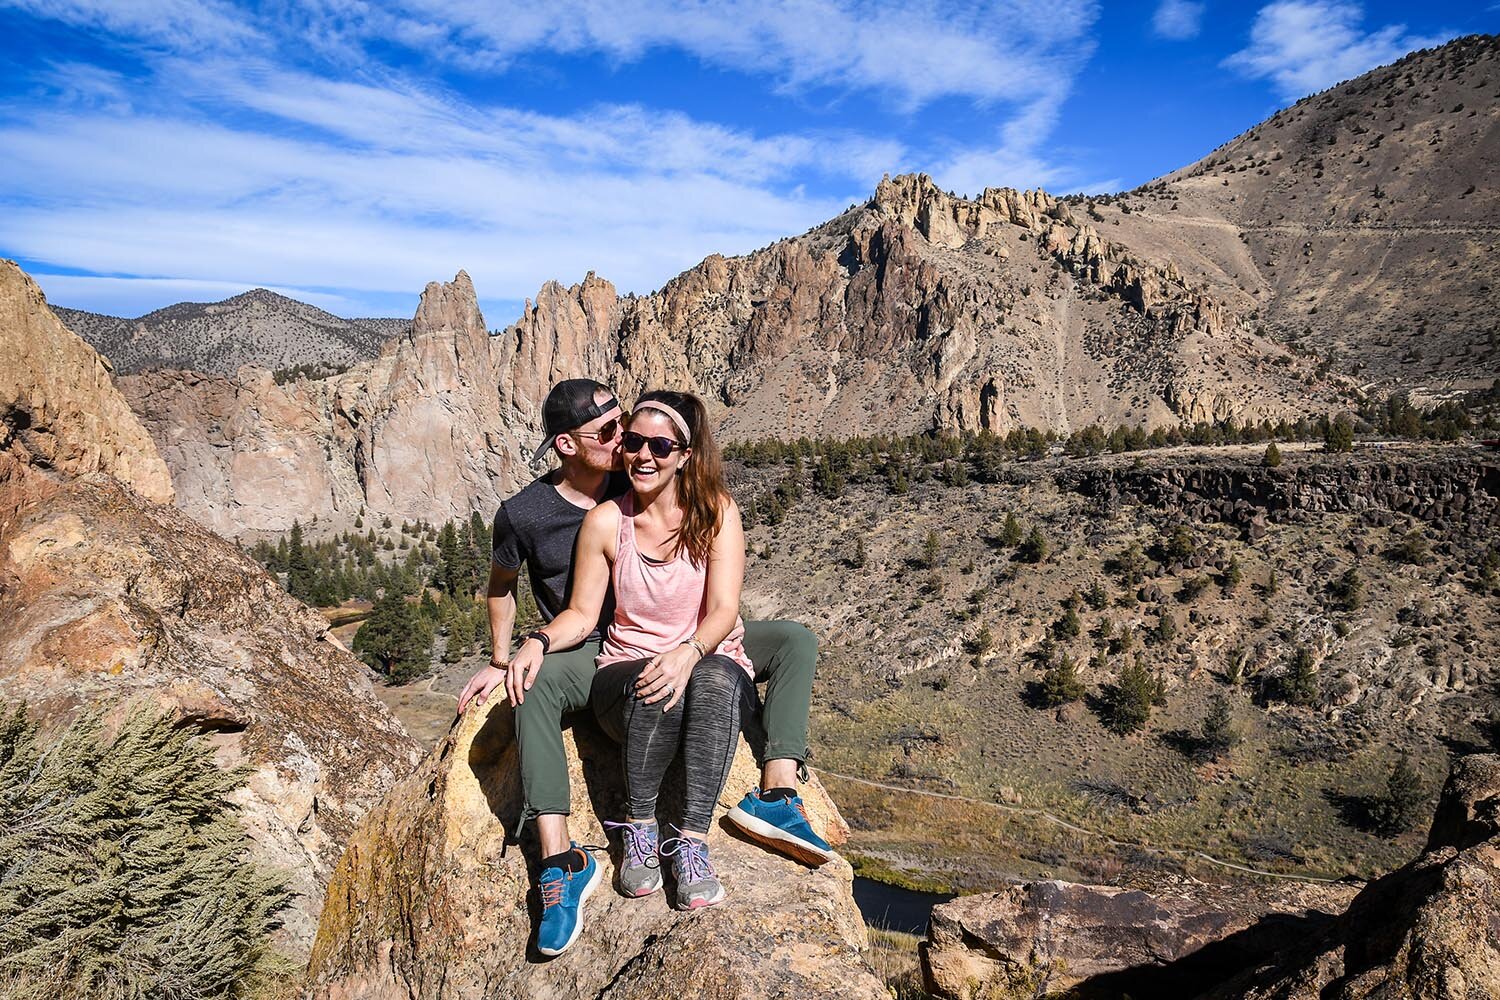 Reasons we’re smiling: 1) Getting our first fall in a few years! 2) Exploring new places, like this one: Smith Rock, Oregon. 3) Quarter 3 of 2019 was pretty great for our blog. Yipee!